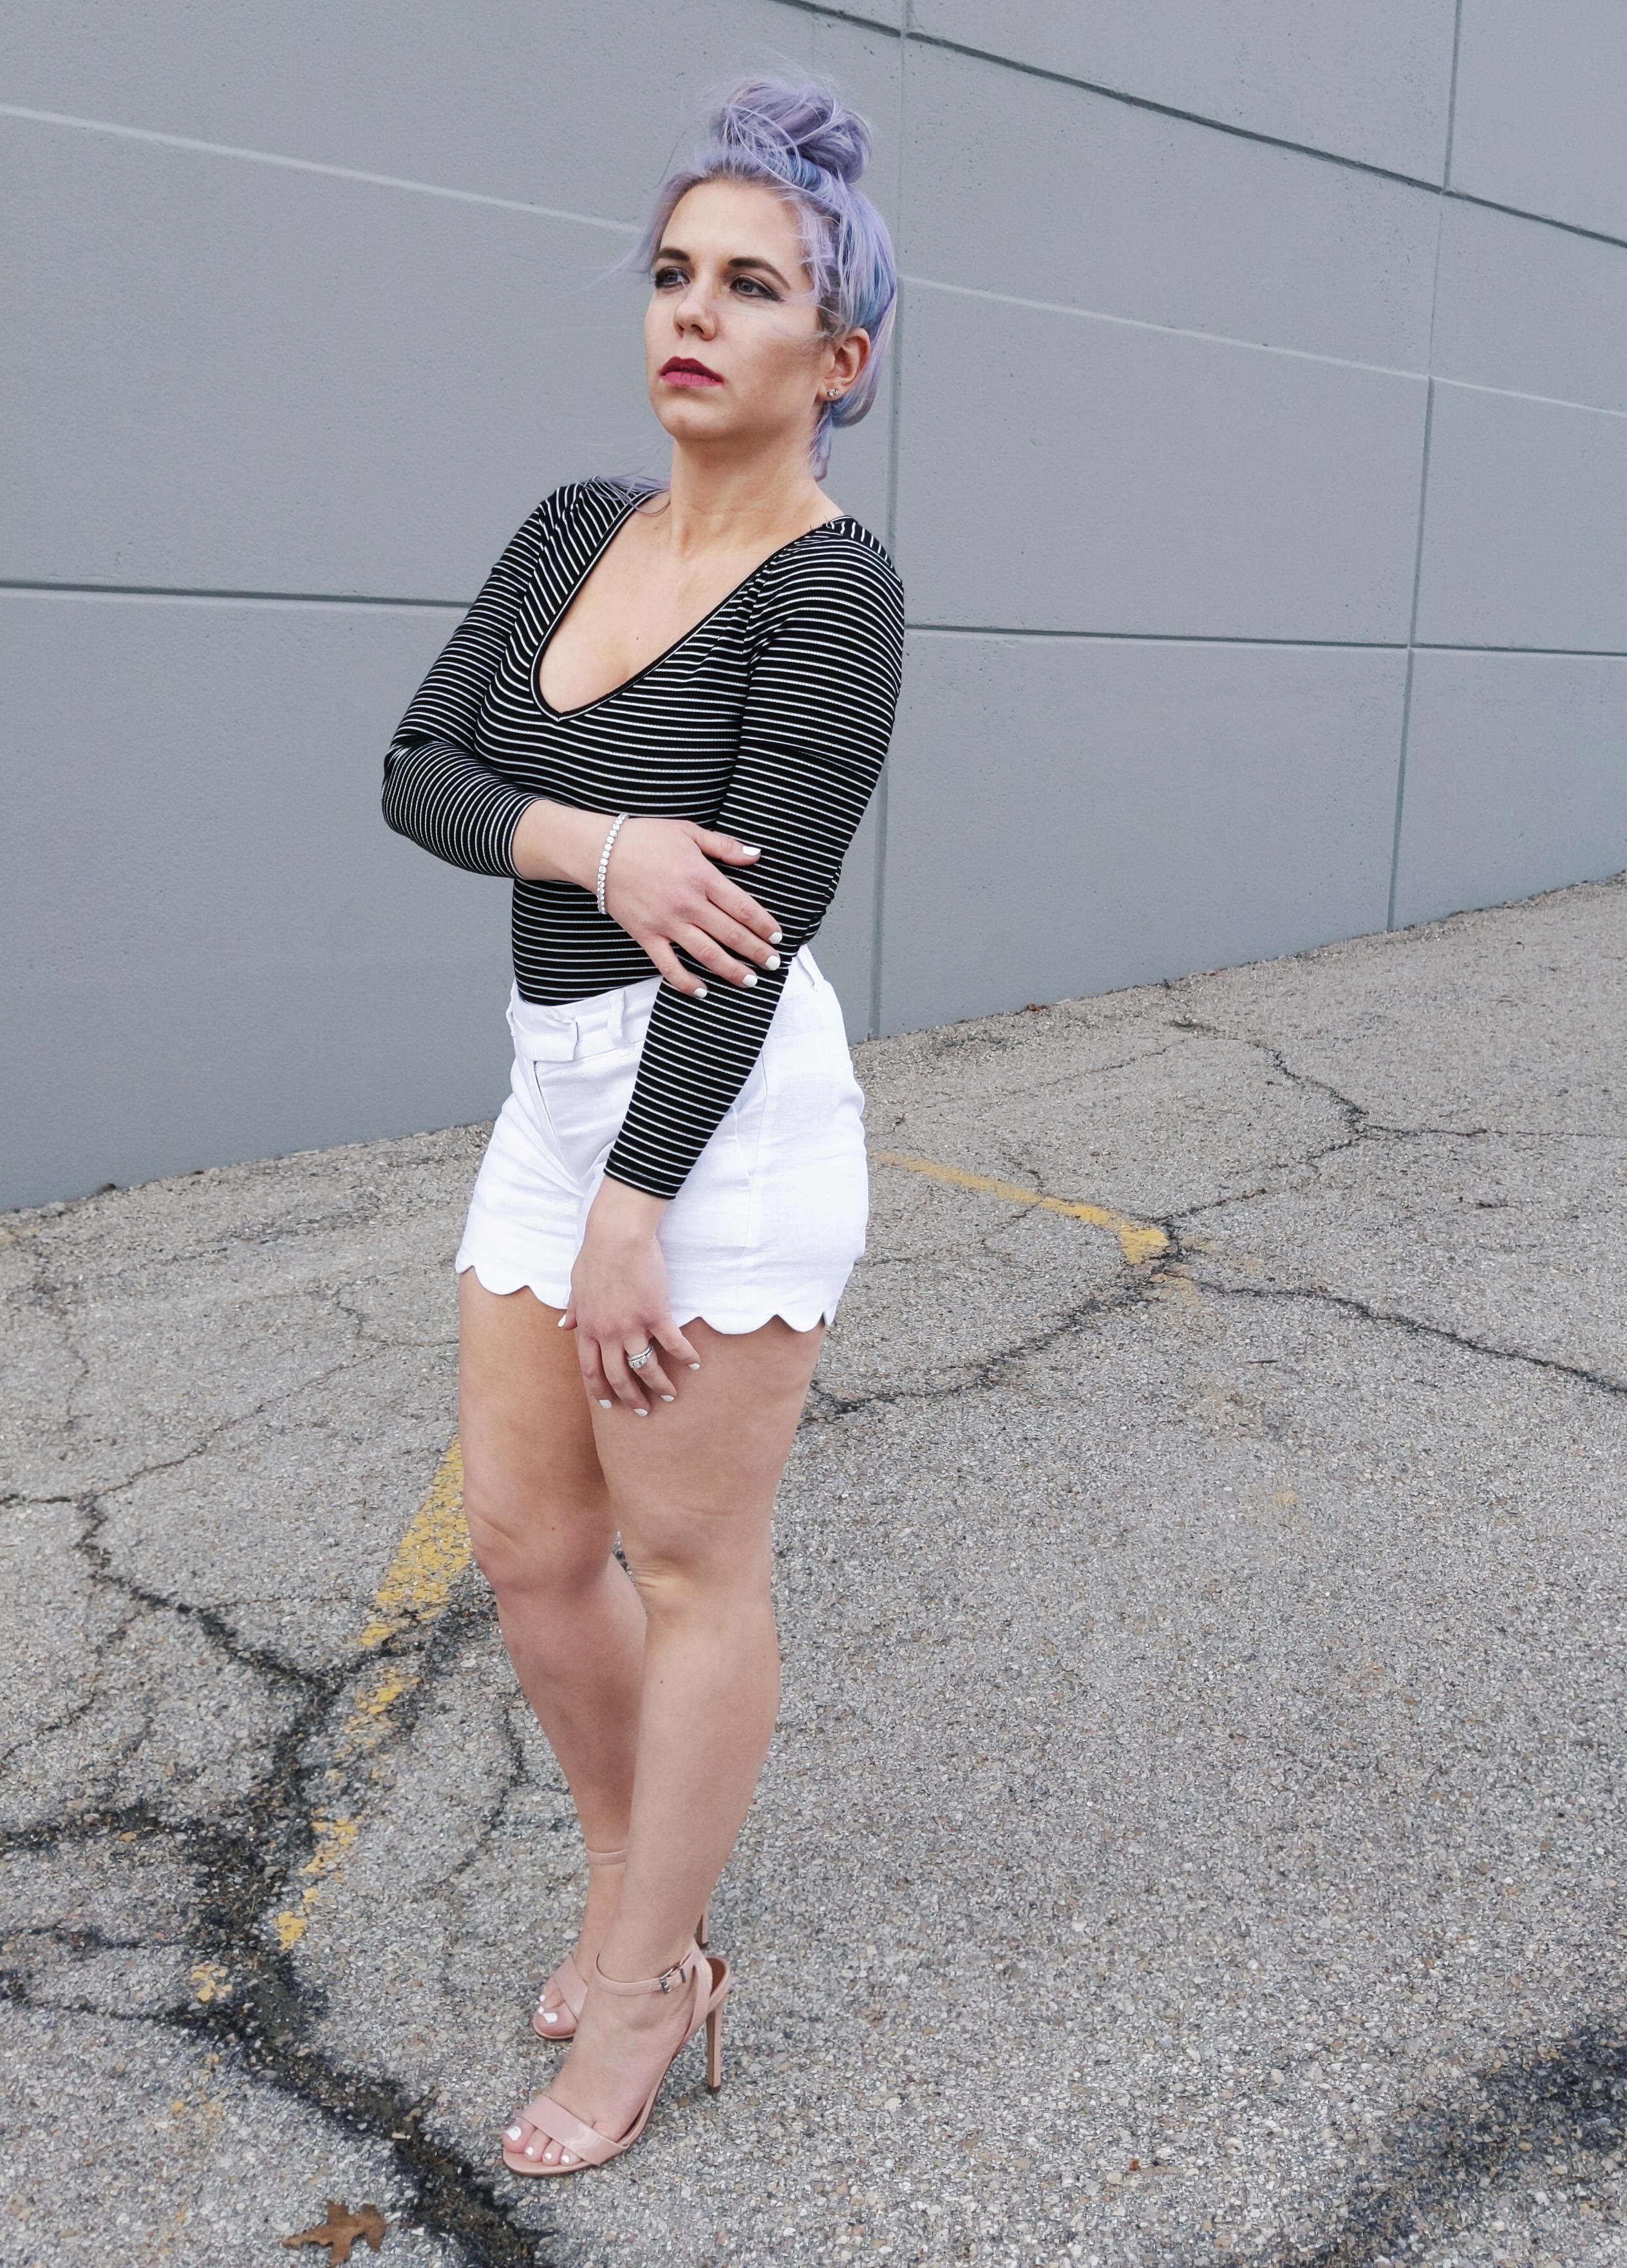 #sponsored This gorgeous tennis bracelet is the perfect finishing touch to this black and white spring outfit! The tennis bracelet is from @Kohls fine jewelry collection and matches everything! I love the sparkle it adds to this black bodysuit and white scalloped shorts outfit for spring fashion 2019. #KohlsJewelry #KohlsFinds #WomensFashion #SpringStyle 